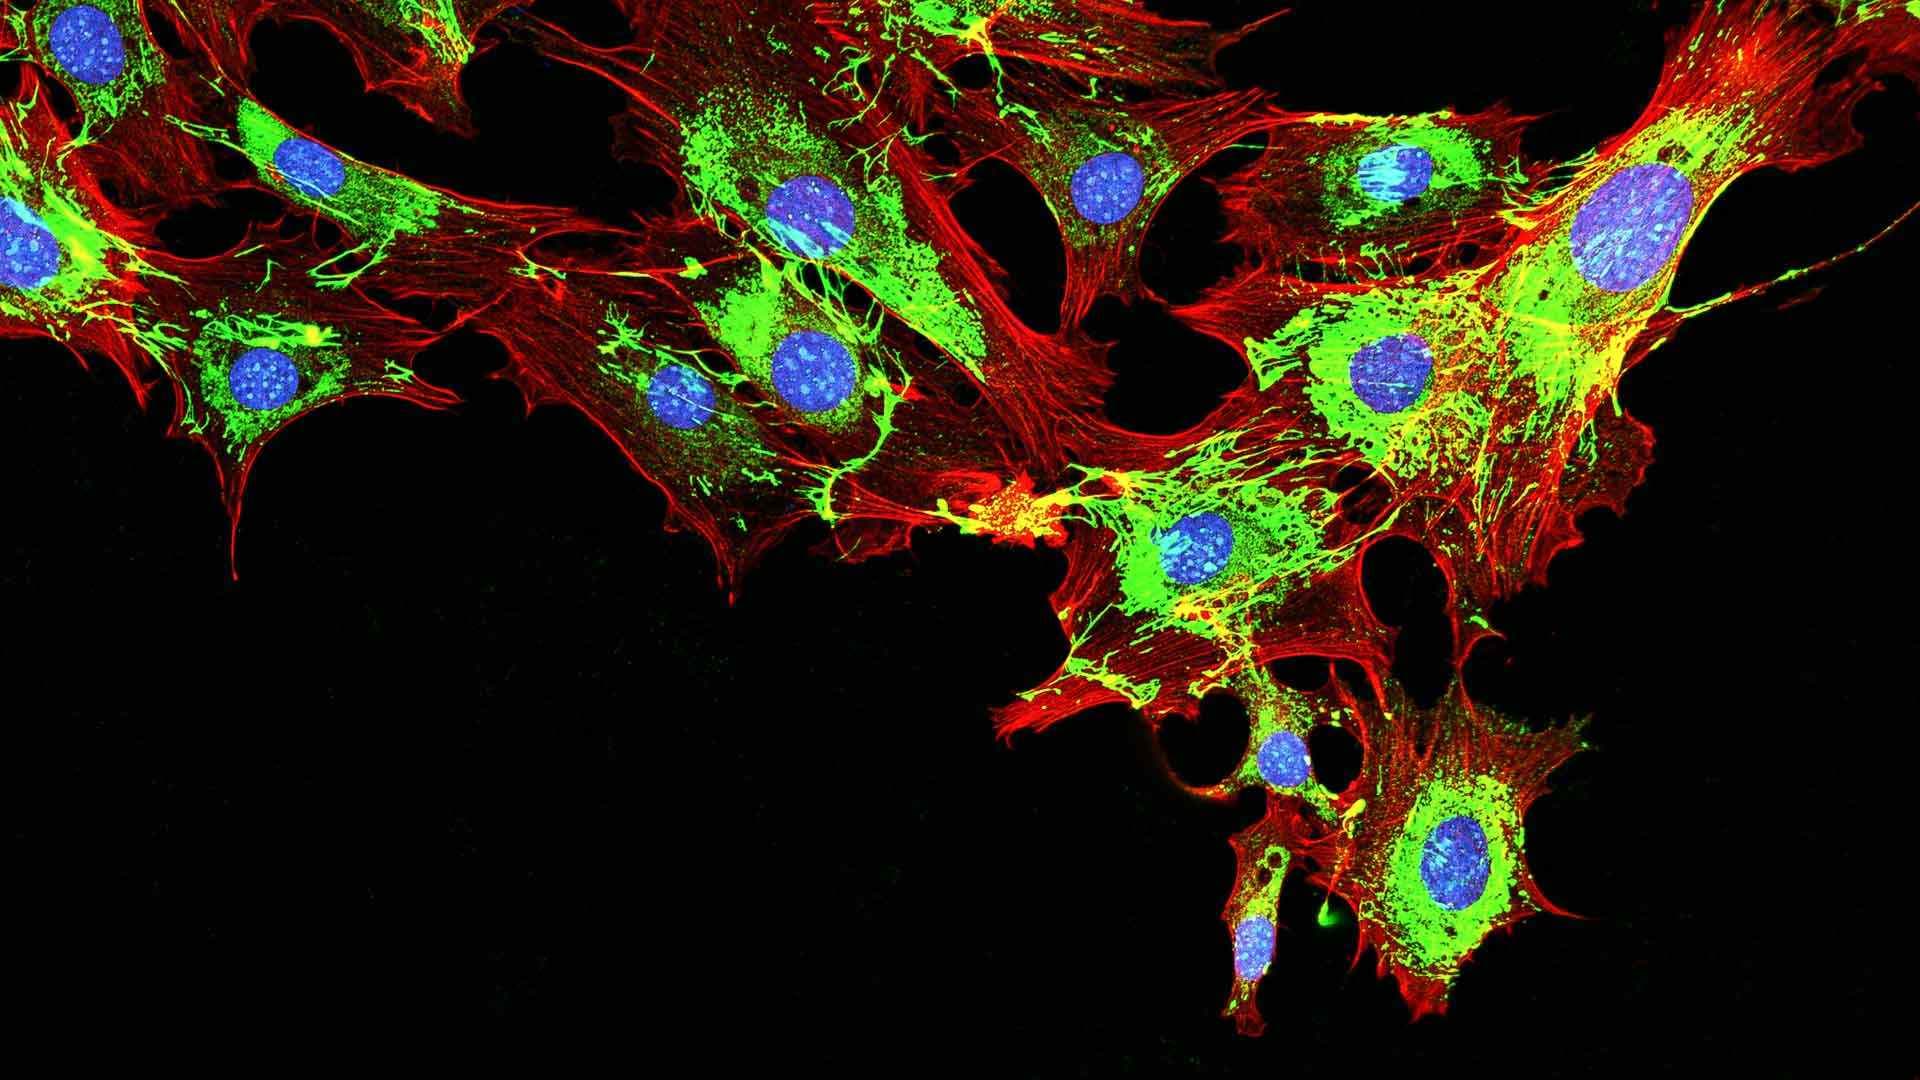 Imaging of metastatic cancer cells spreading on the surrounding tissue